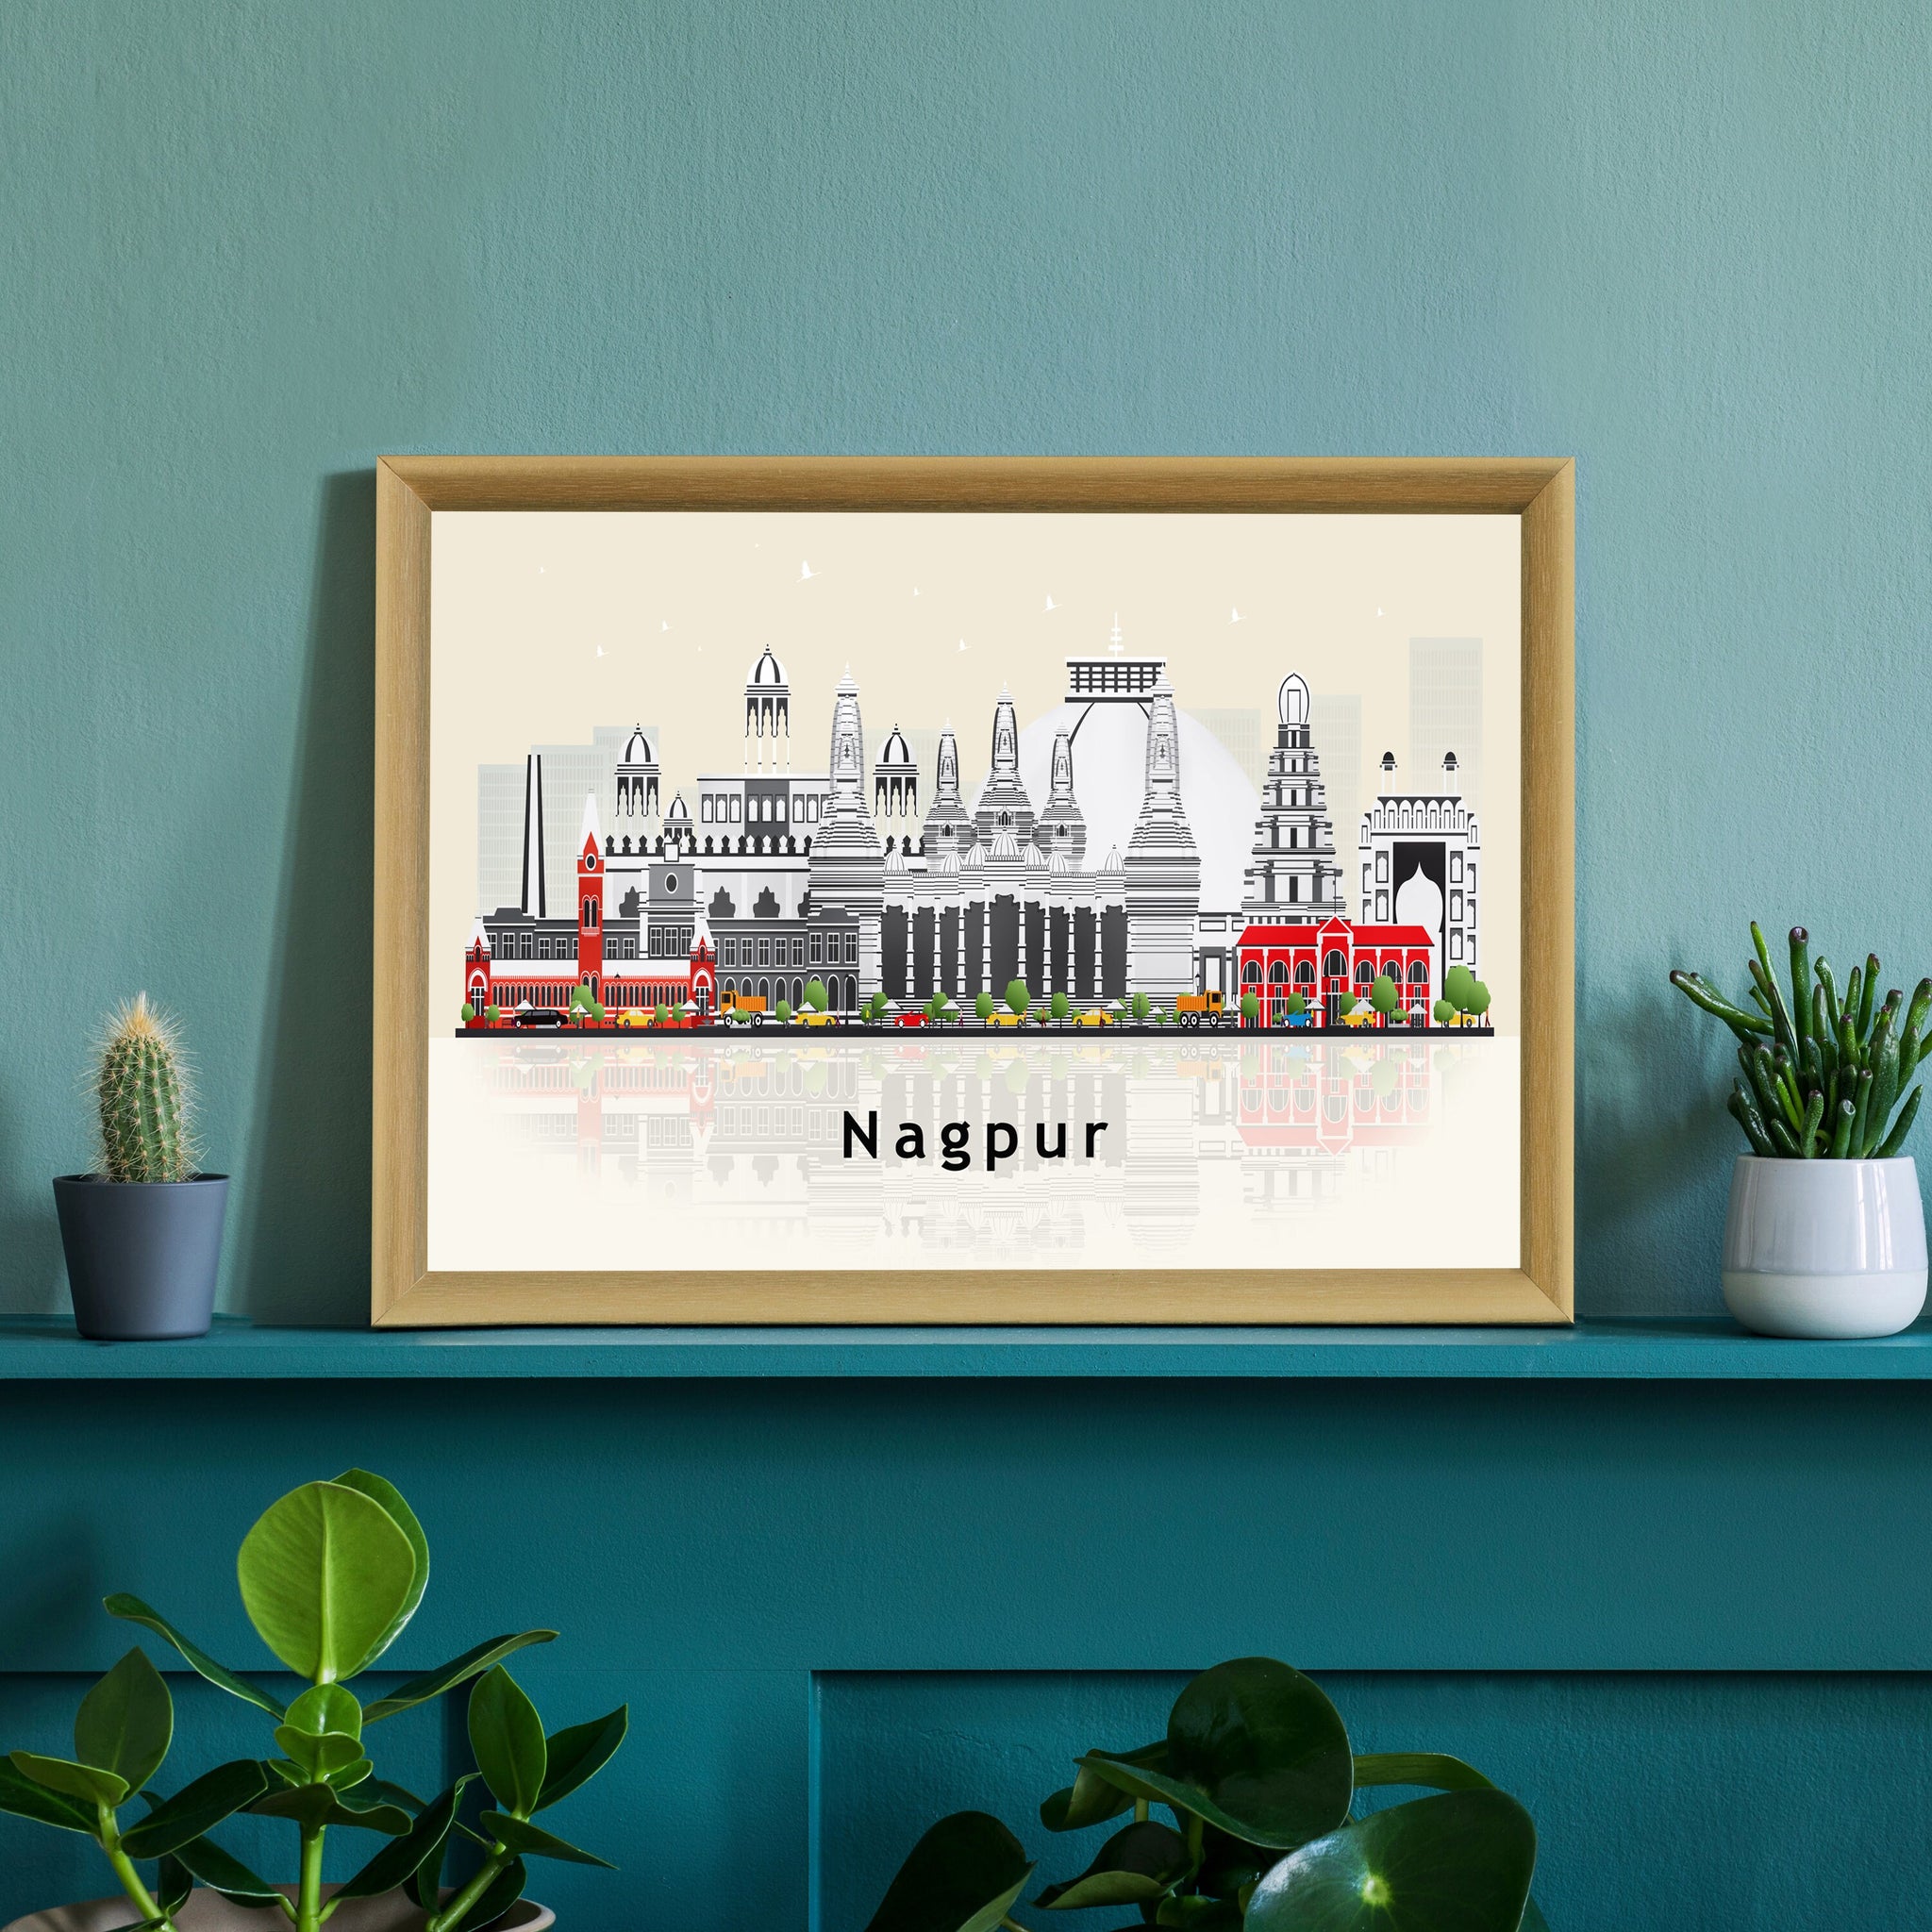 NAGPUR INDIA Illustration skyline poster, Modern skyline cityscape poster, India city skyline landmark map poster, Home wall decoration